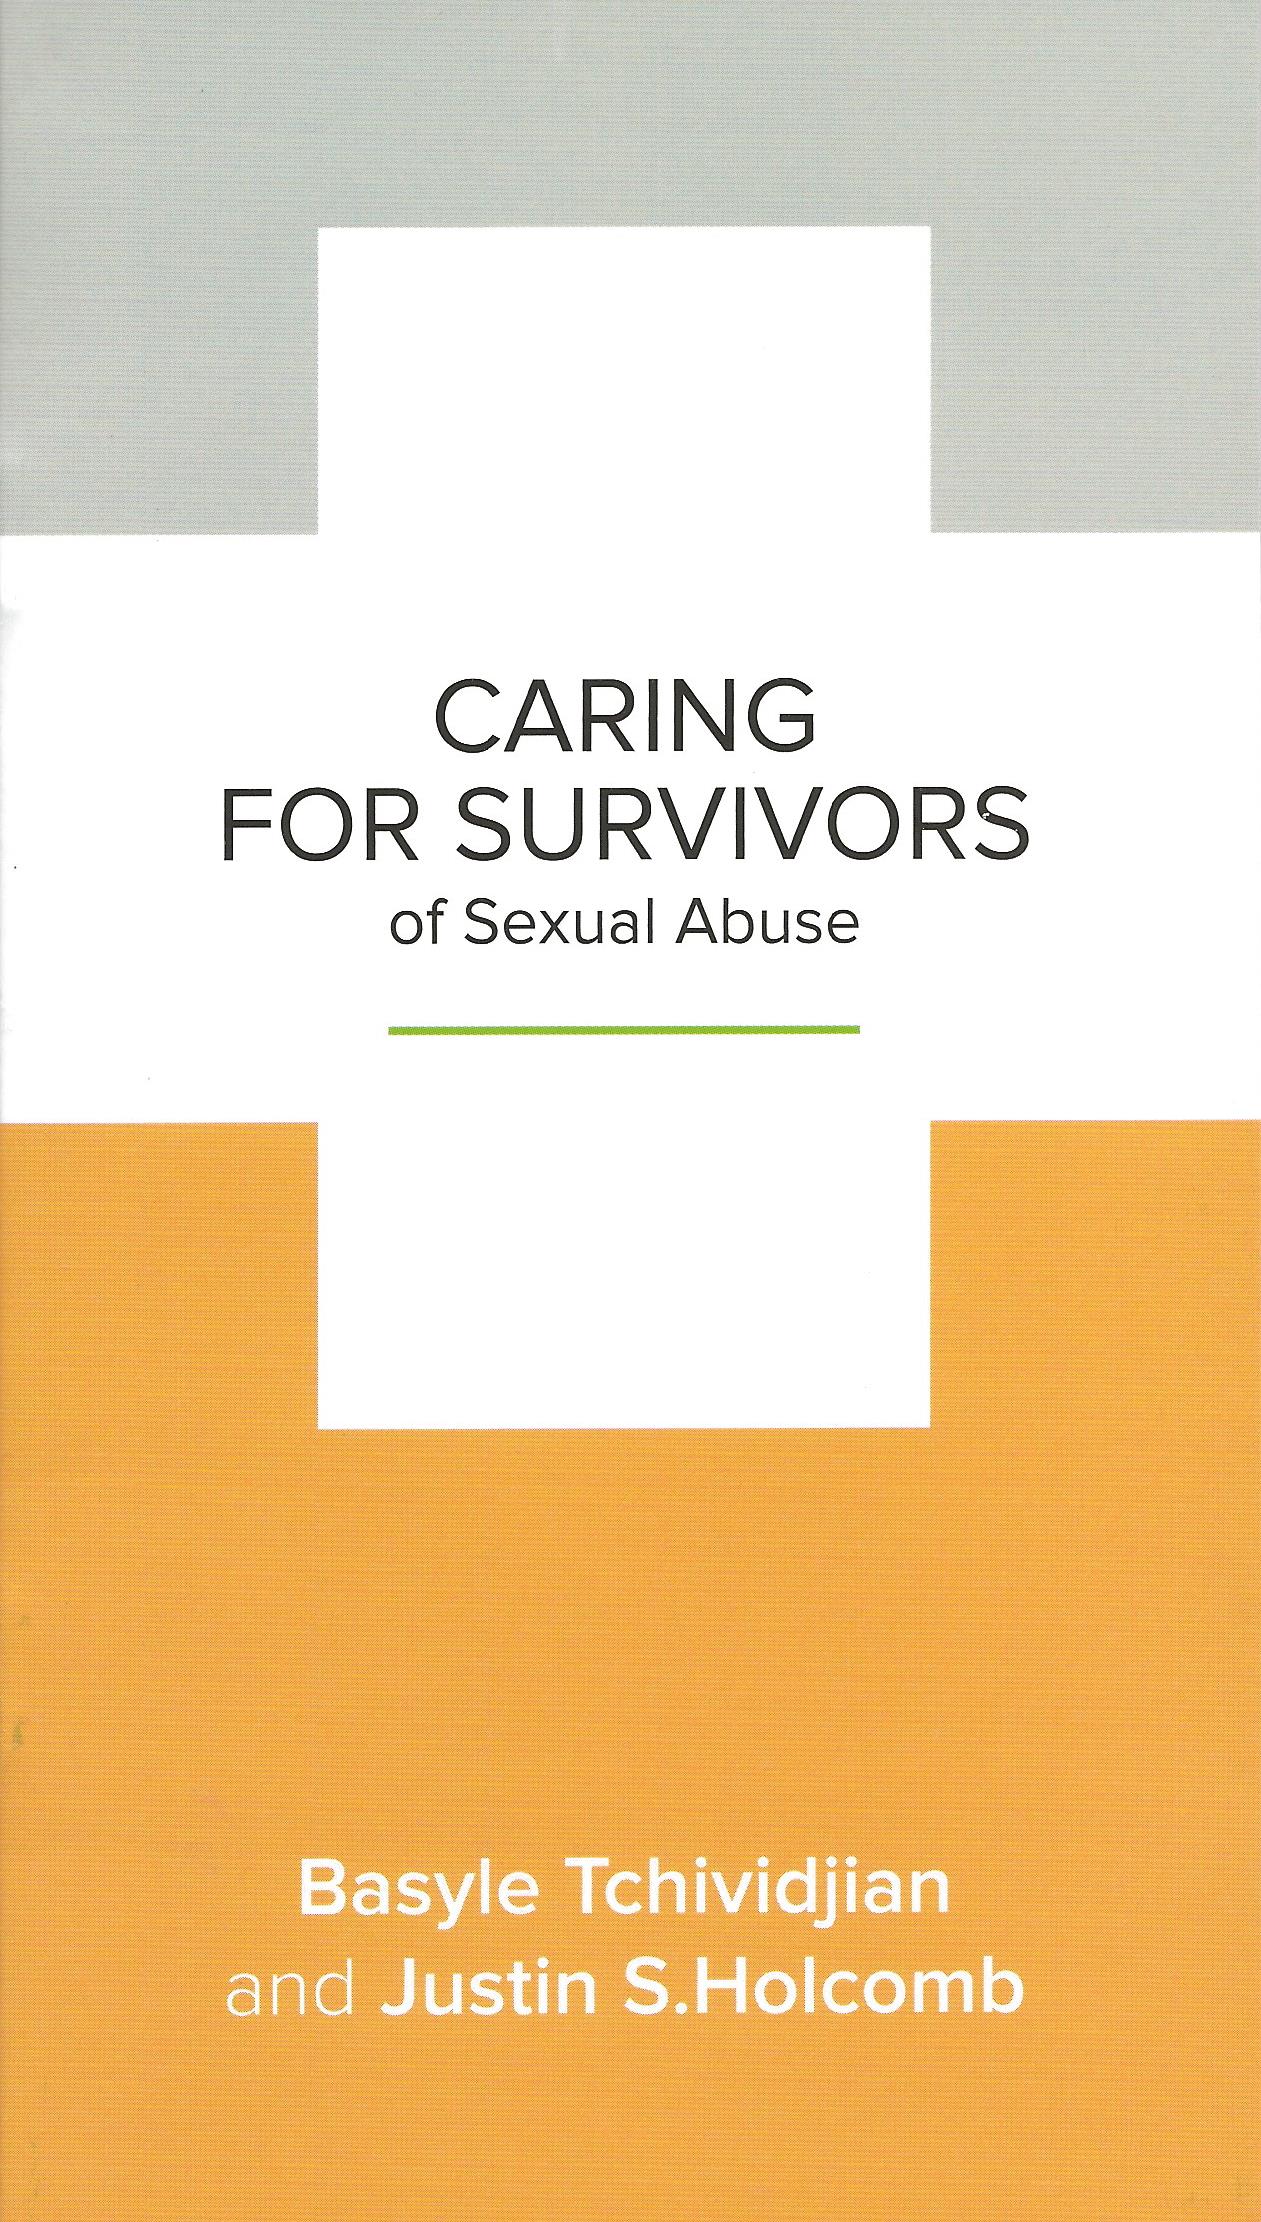 CARING FOR SURVIVORS Basyle Tchividjian and Justin S. Holcomb